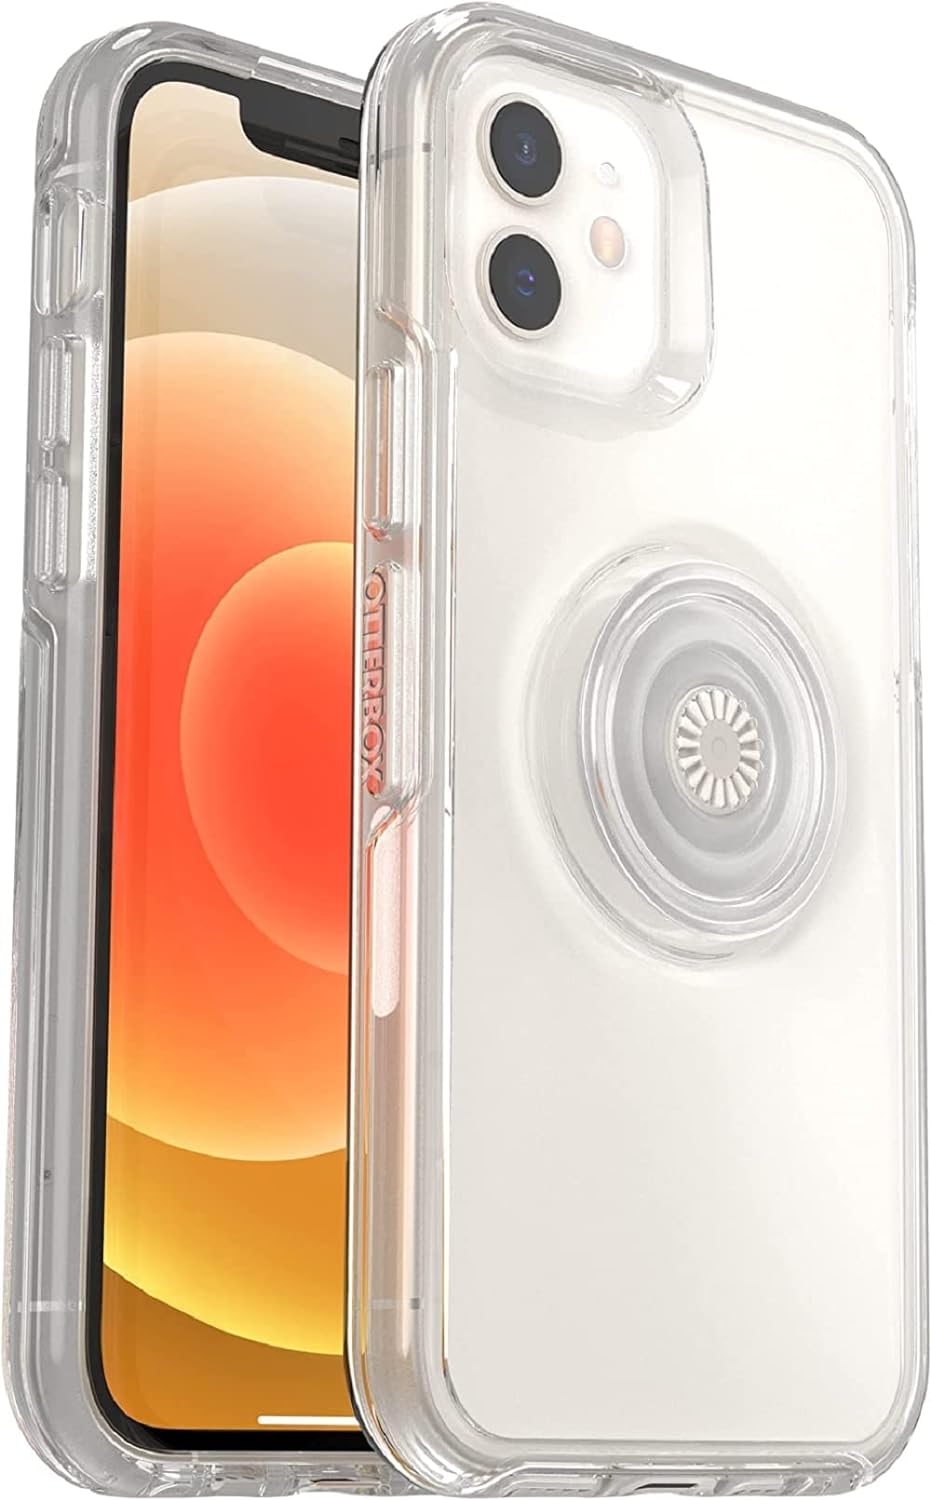 OtterBox Otter+Pop SYMMETRY SERIES Case for Apple iPhone 12 Mini - Clear (Certified Refurbished)